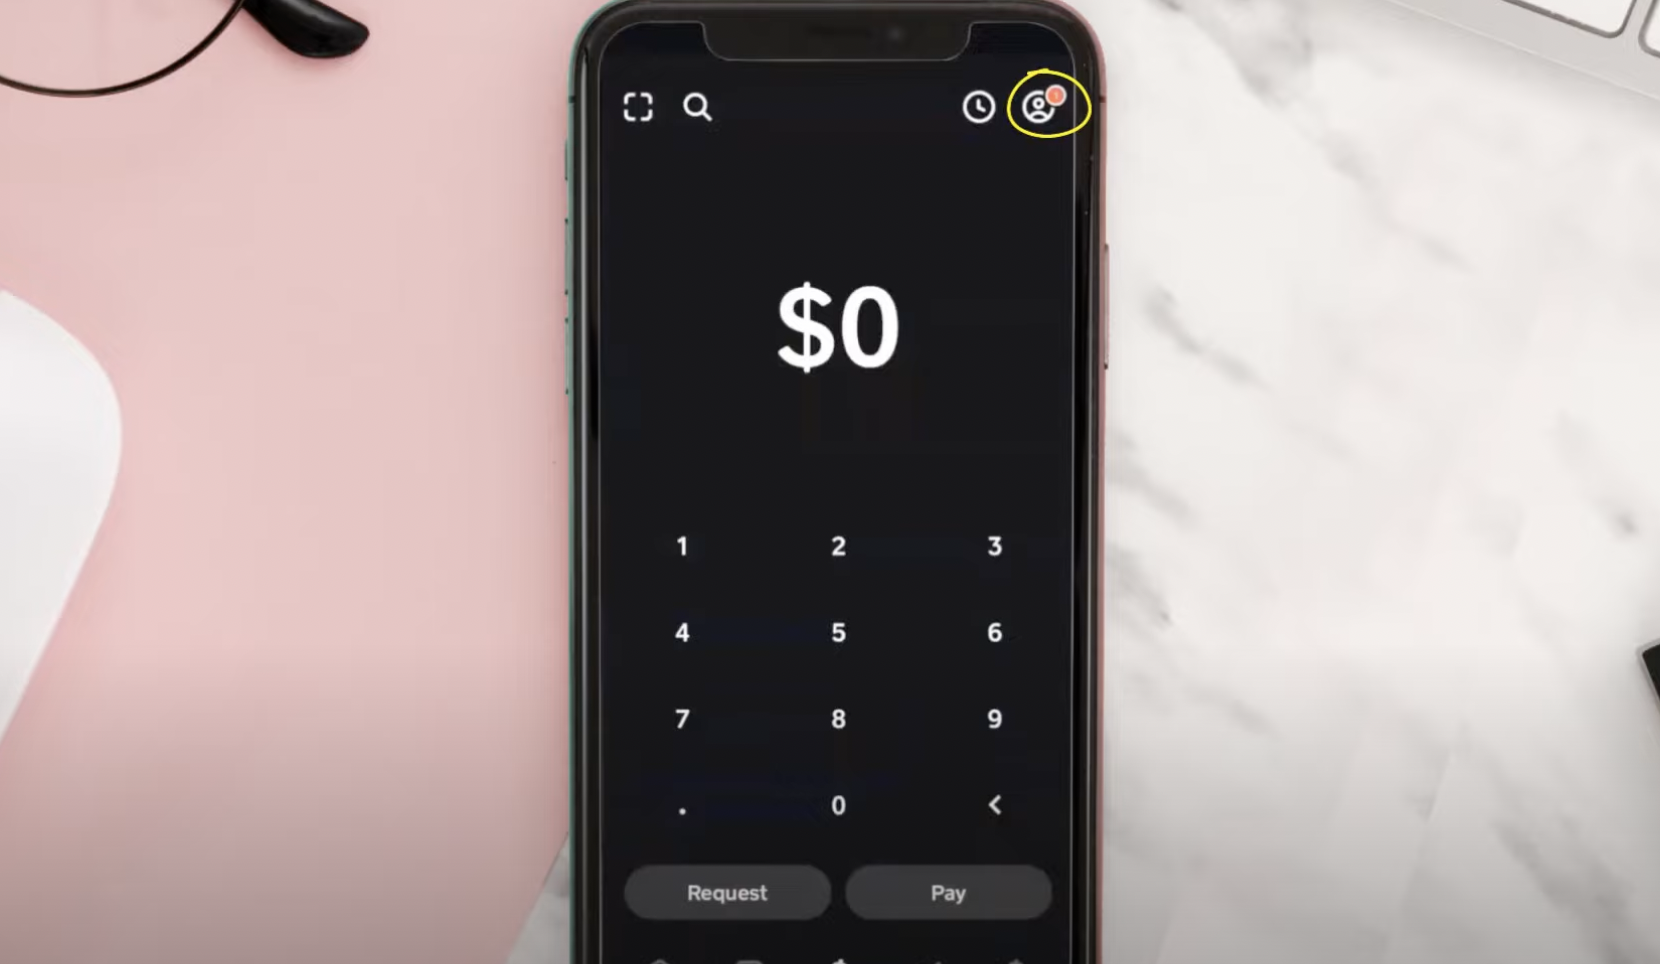 how to access cash app without phone number or email